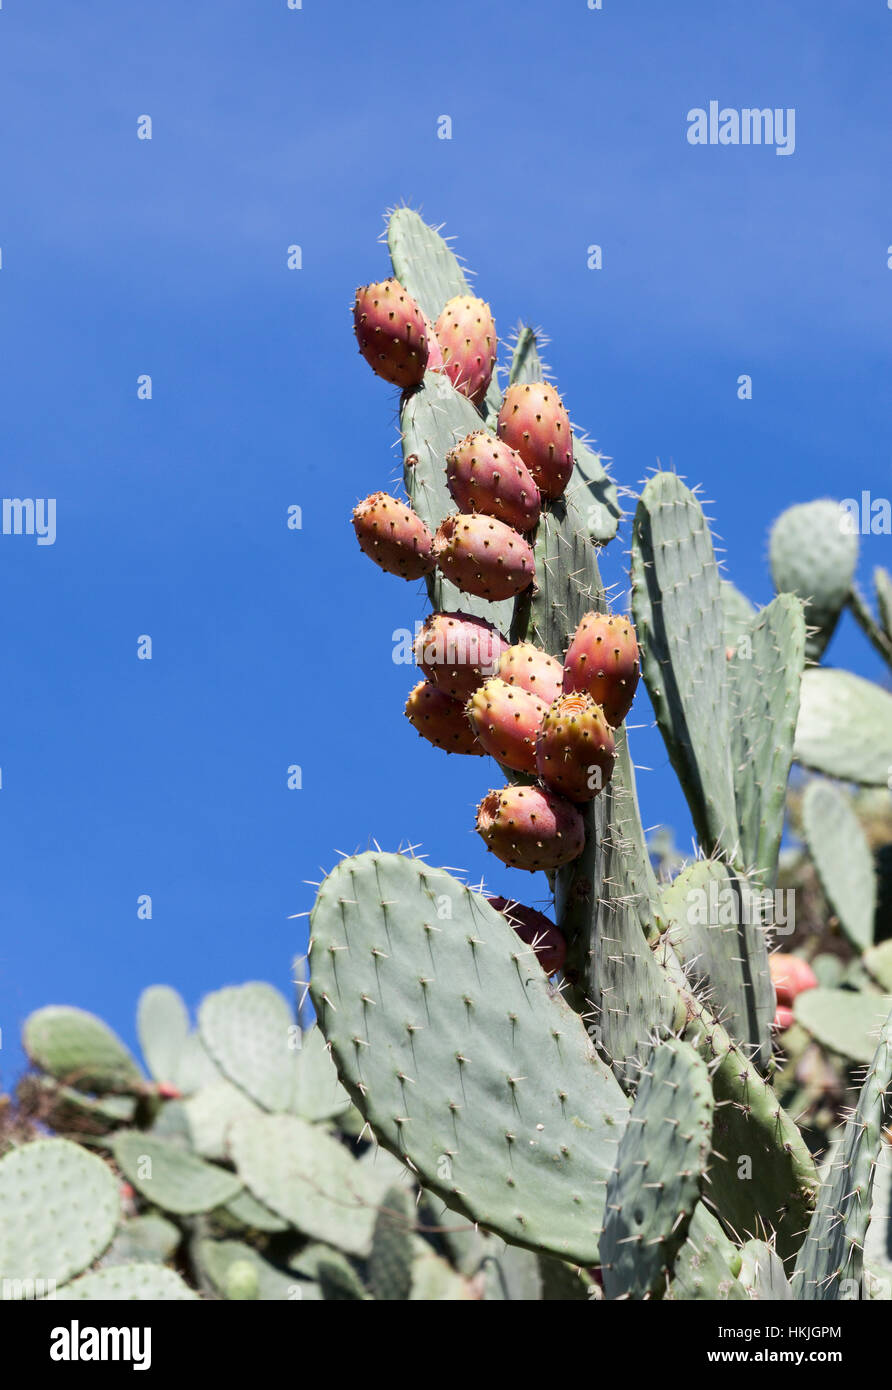 Close up of ripe prickly pear fruits on cactus plant Stock Photo